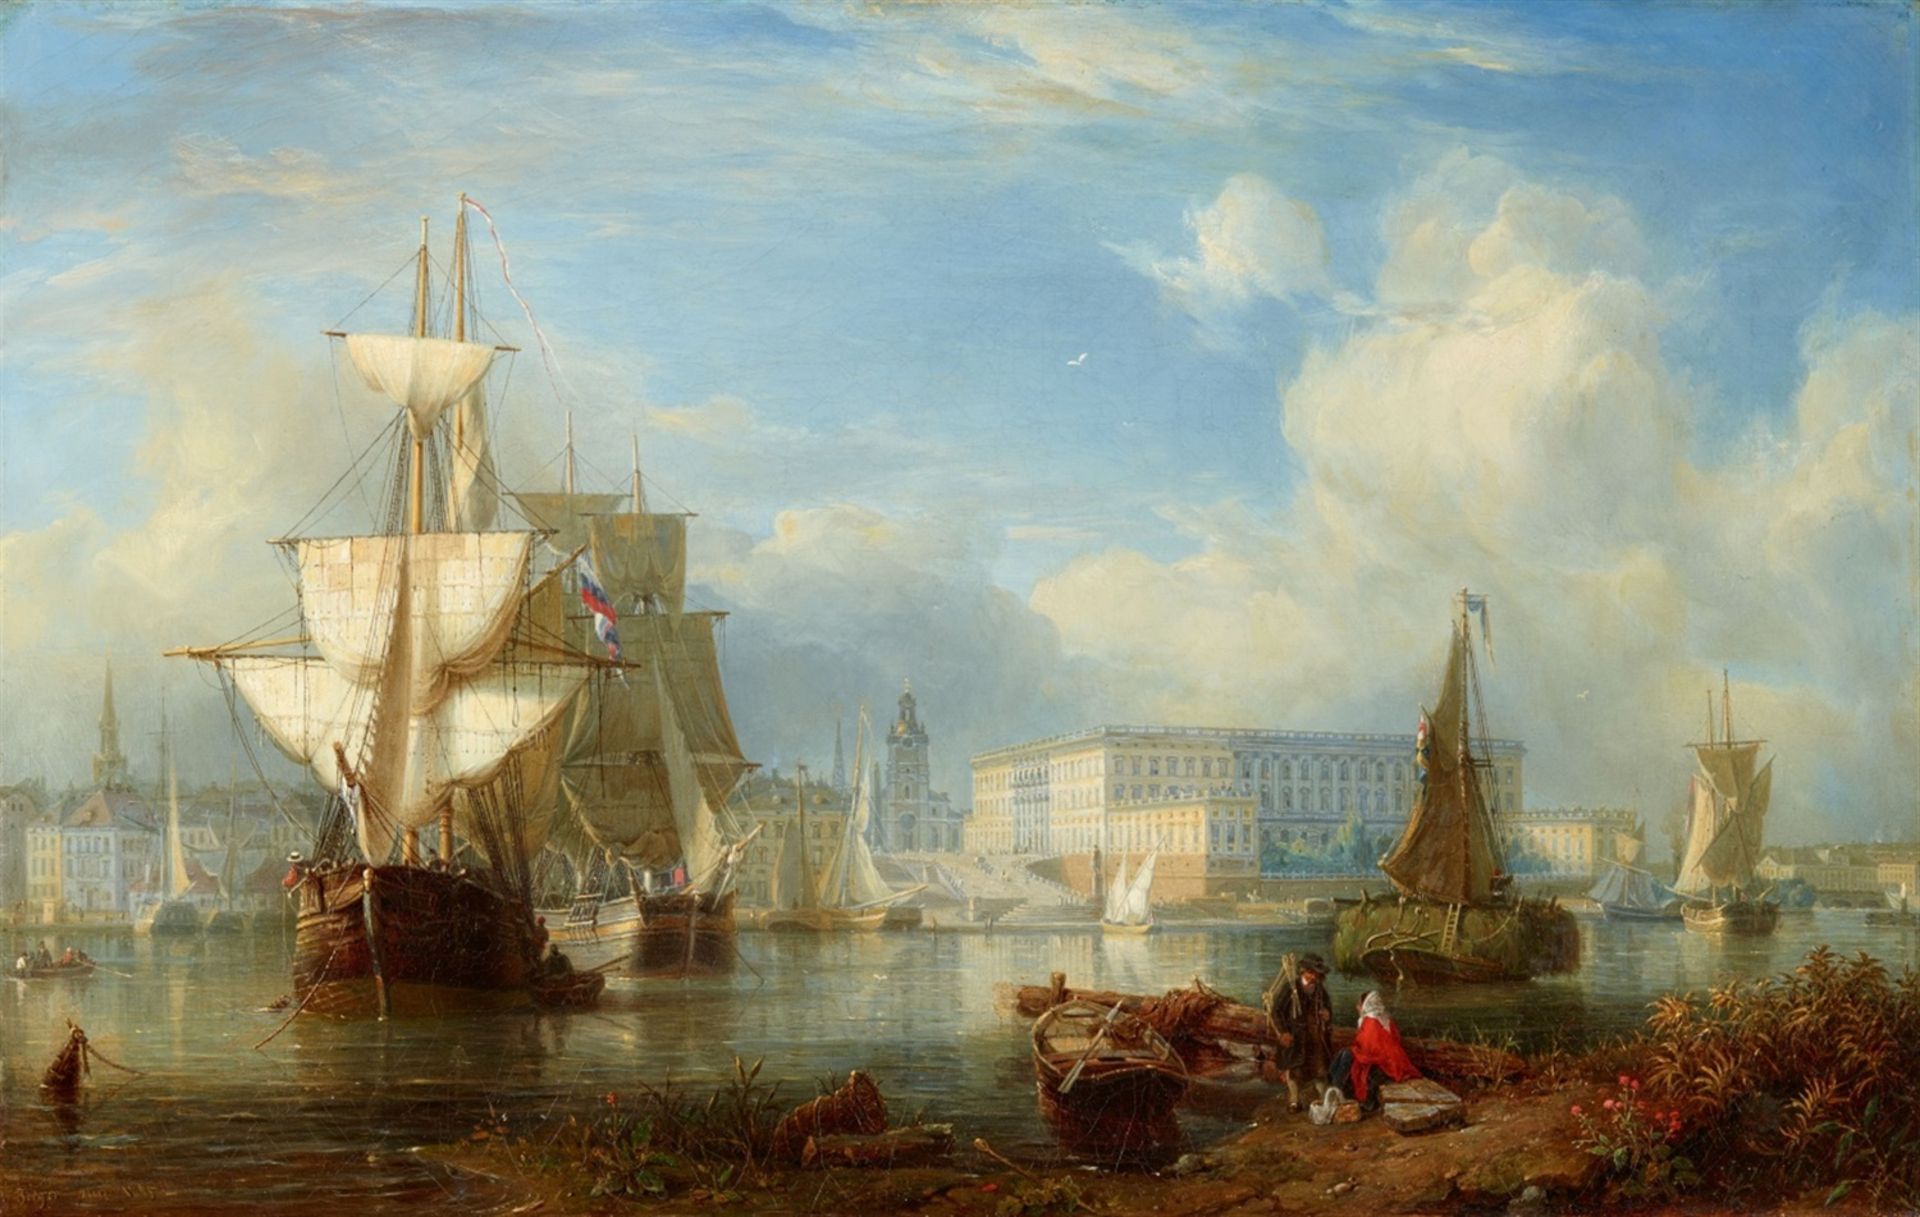 Johann Kristian BergerView of the Royal Palace in StockholmOil on canvas (relined). 41.6 x 65 cm.